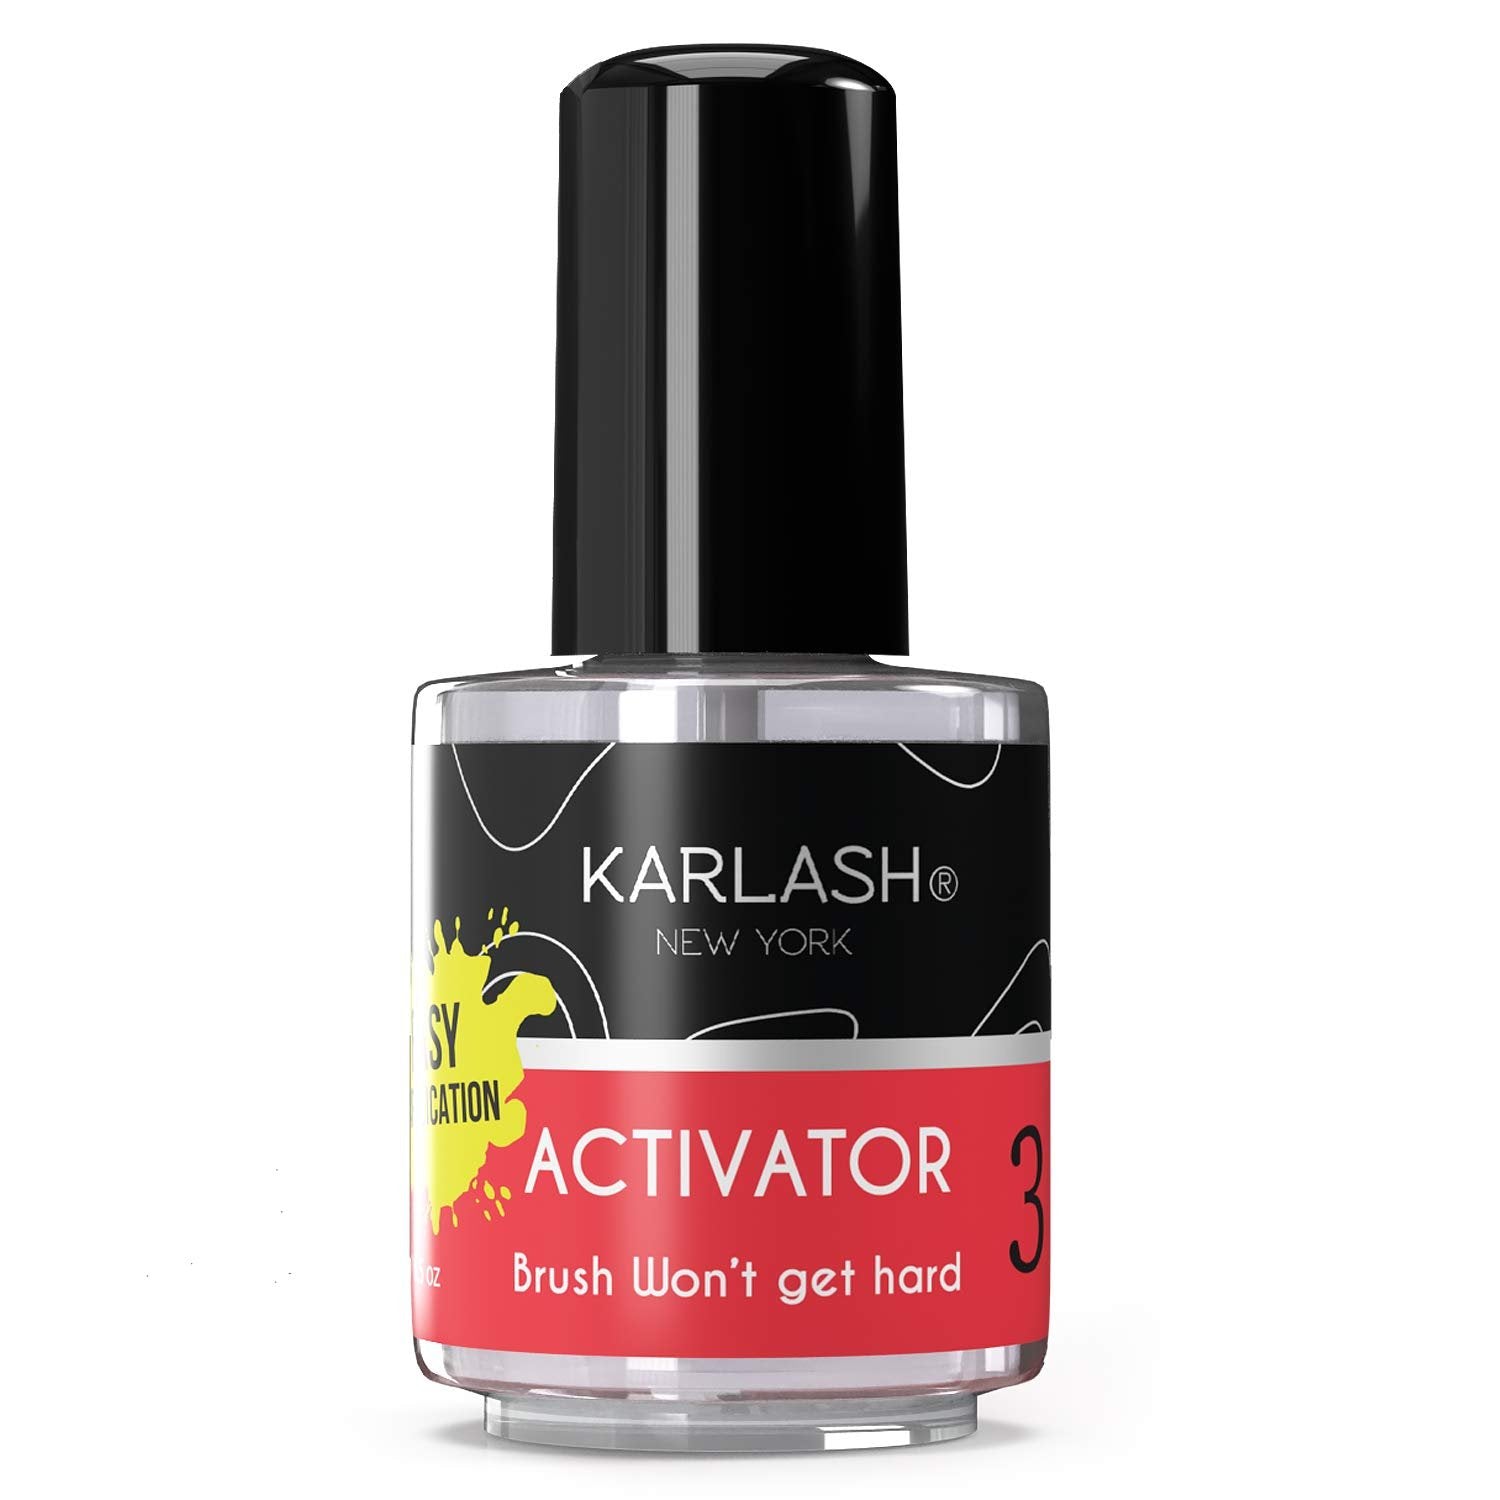 Karlash Professional Dipping Powder System Liquid Step #3 Activator Easy Applica